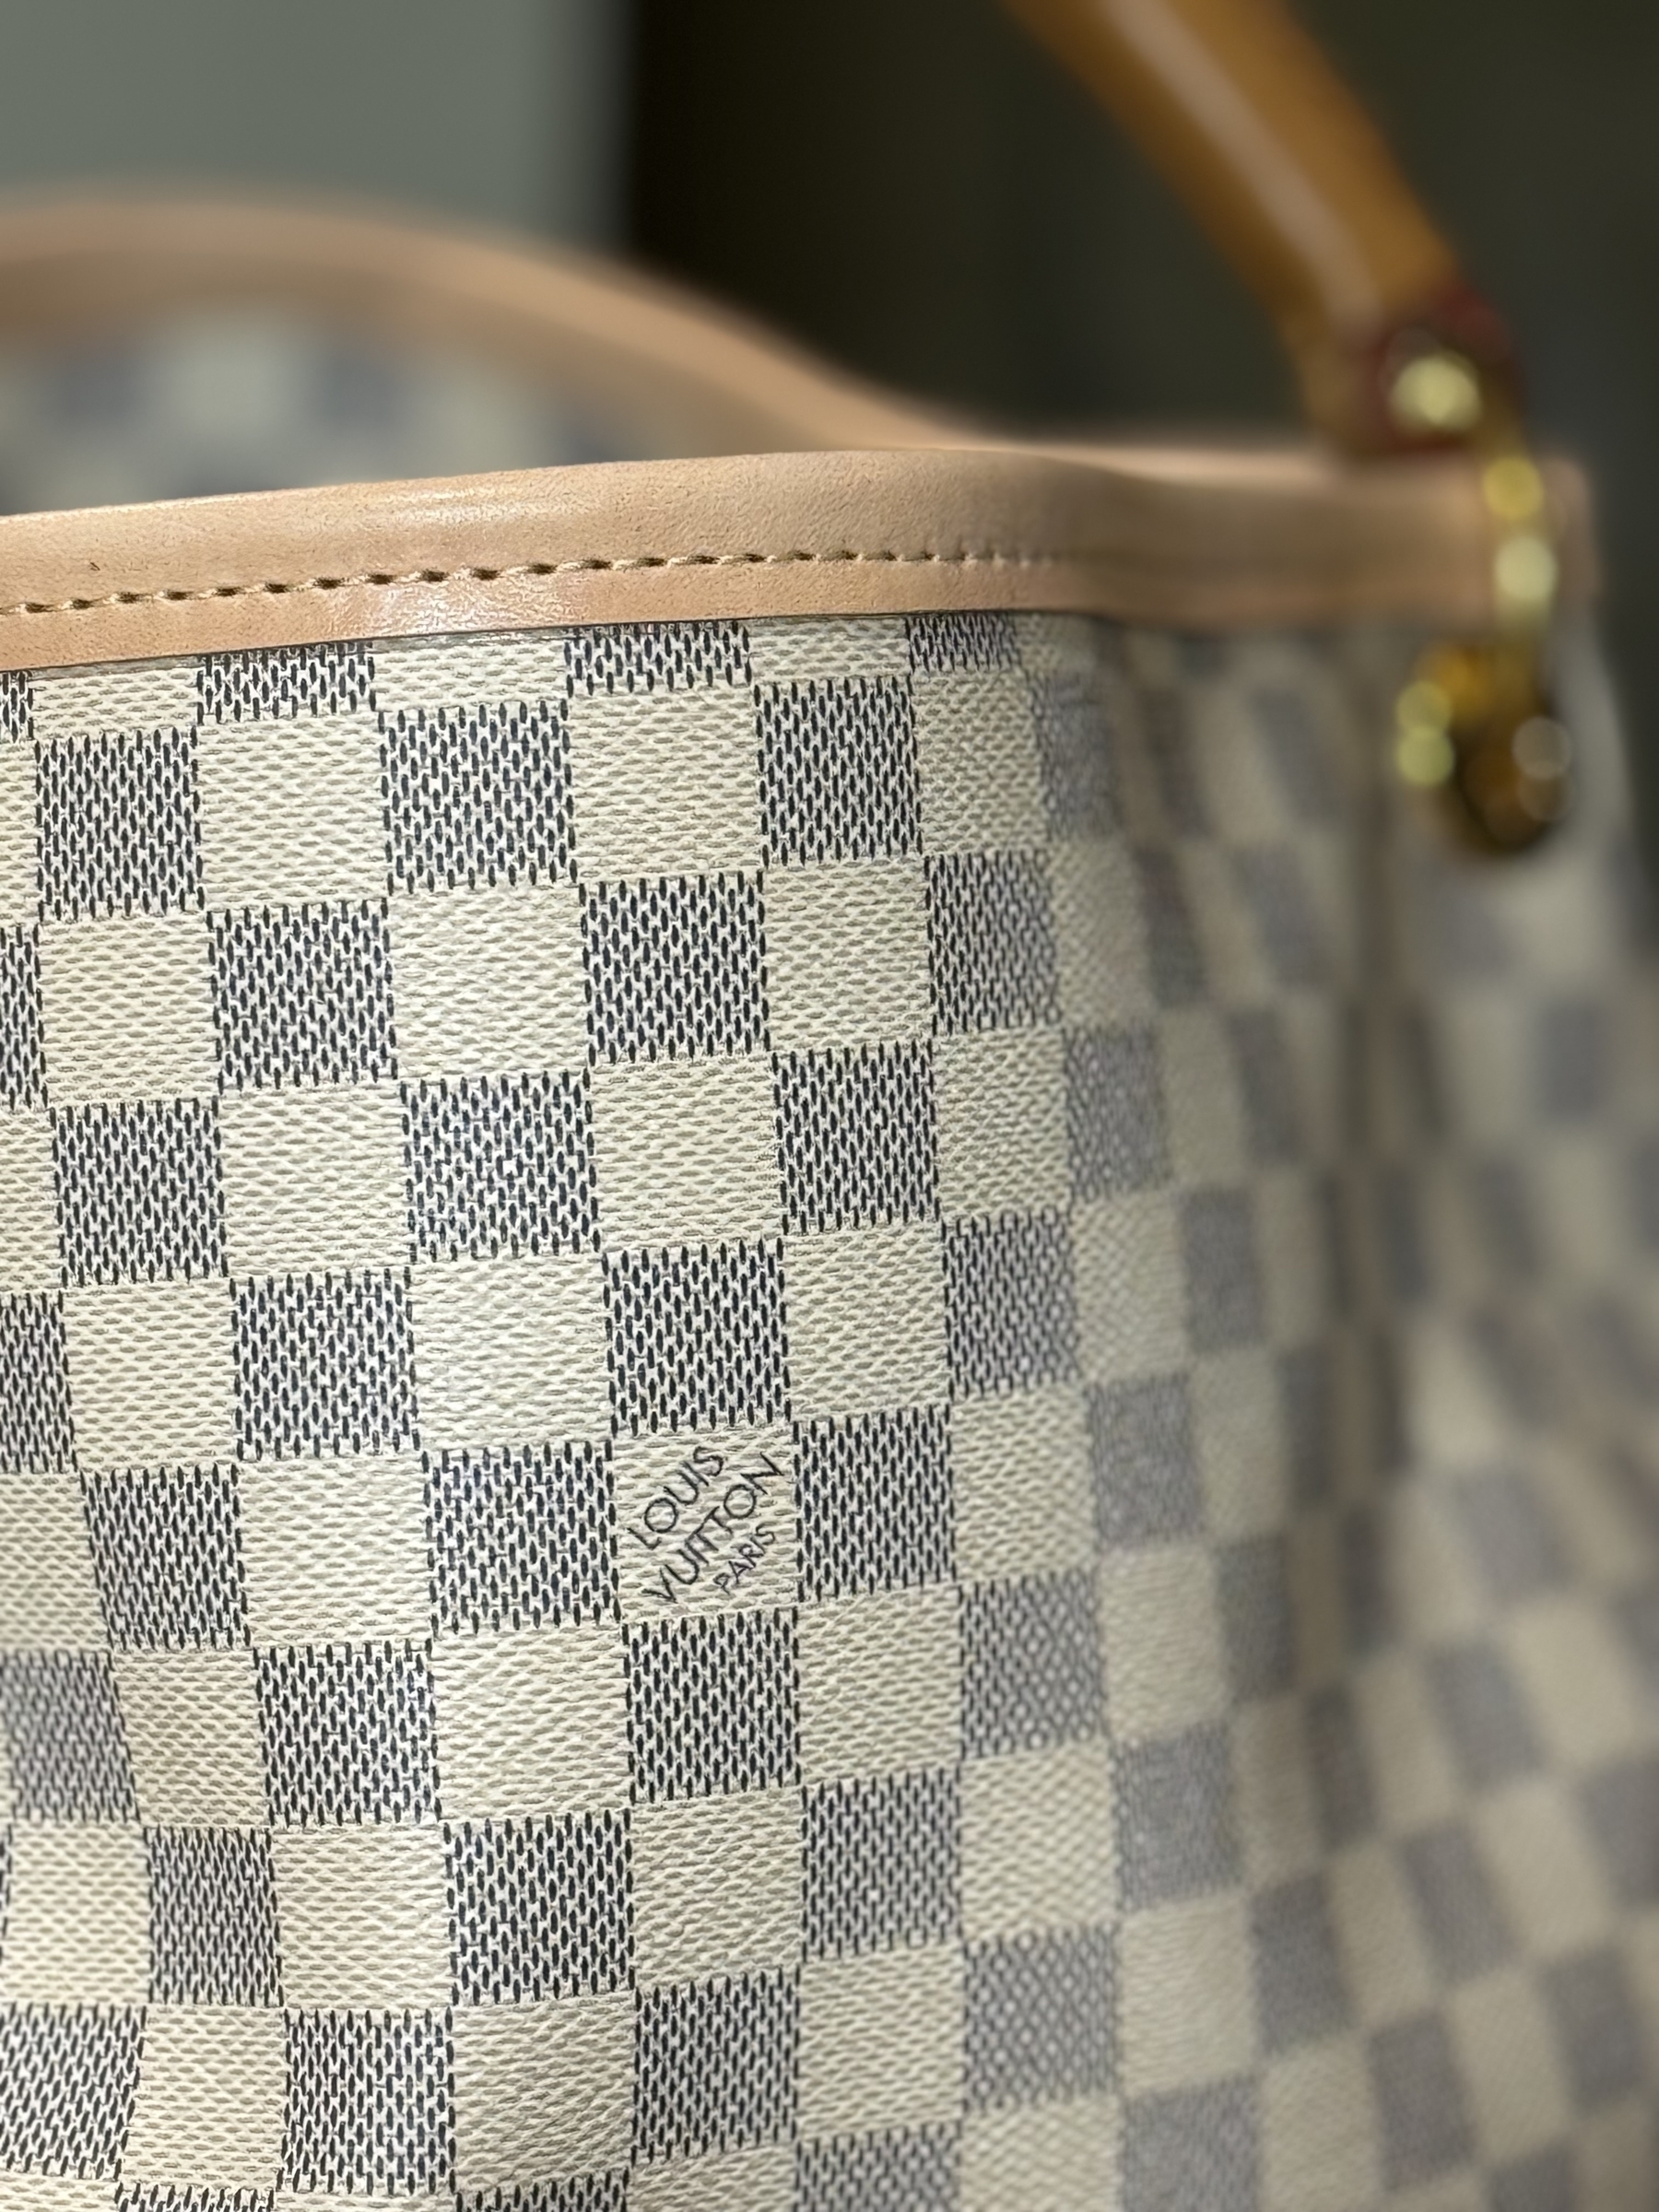 A close-up shot of a beige and white checkered and repaired handbag with a Louis Vuitton logo.